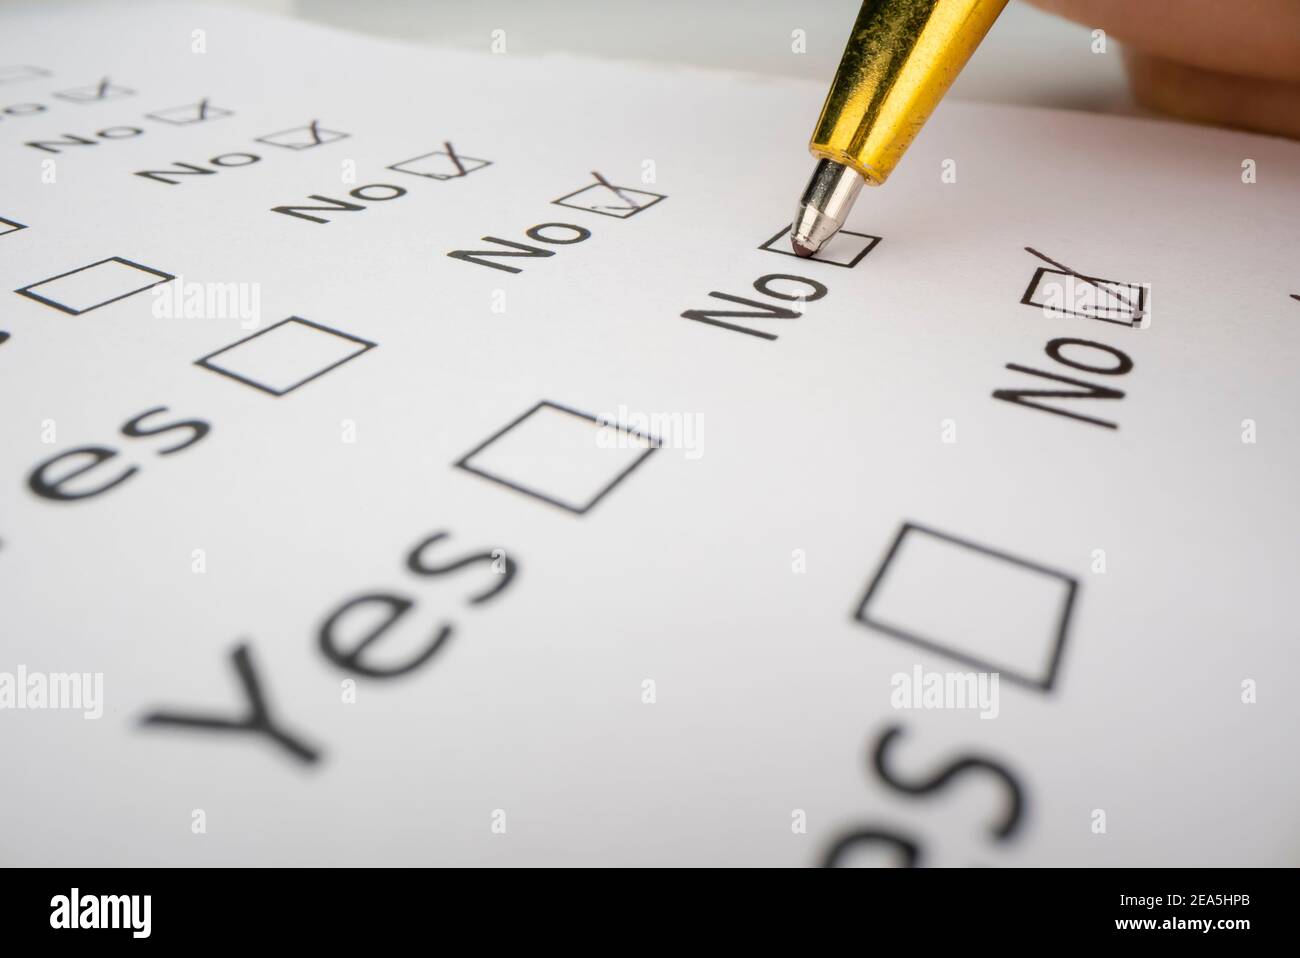 Completing a questionnaire with yes or no questions Stock Photo